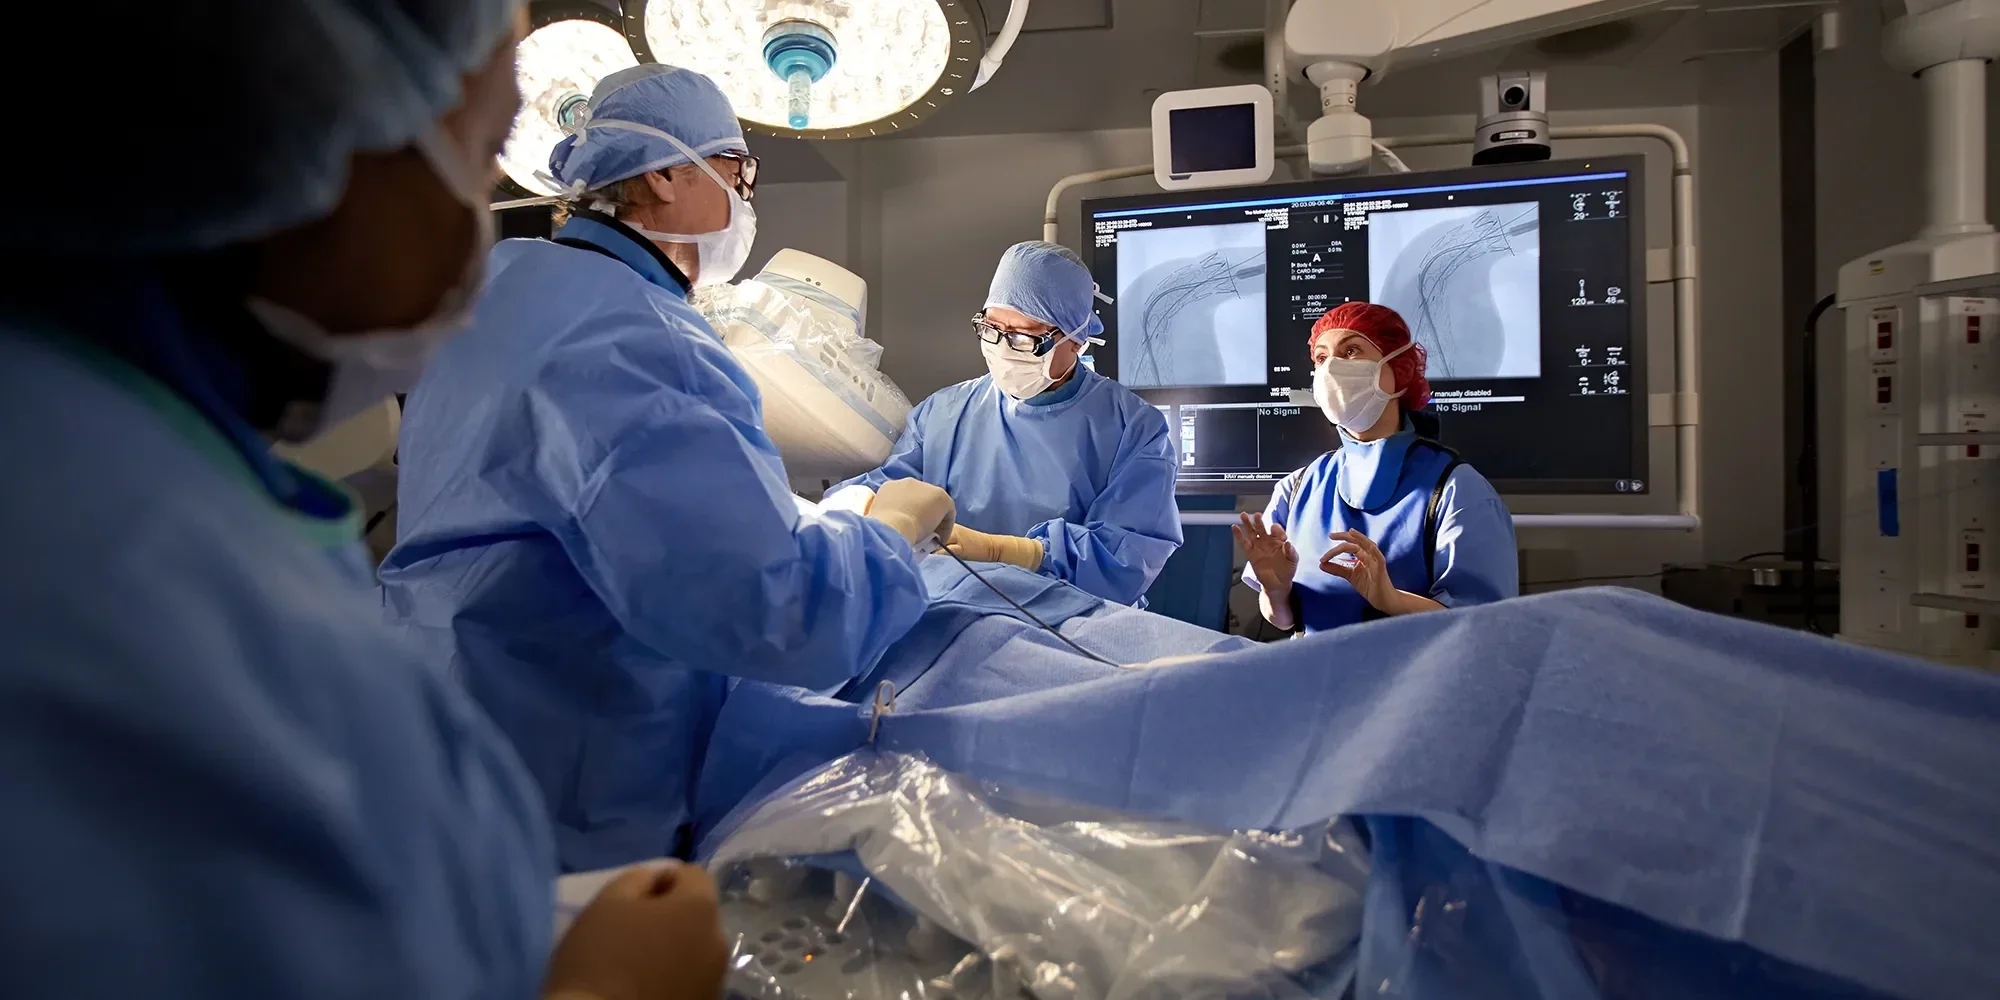 image of doctors performing a procedure in an operating room